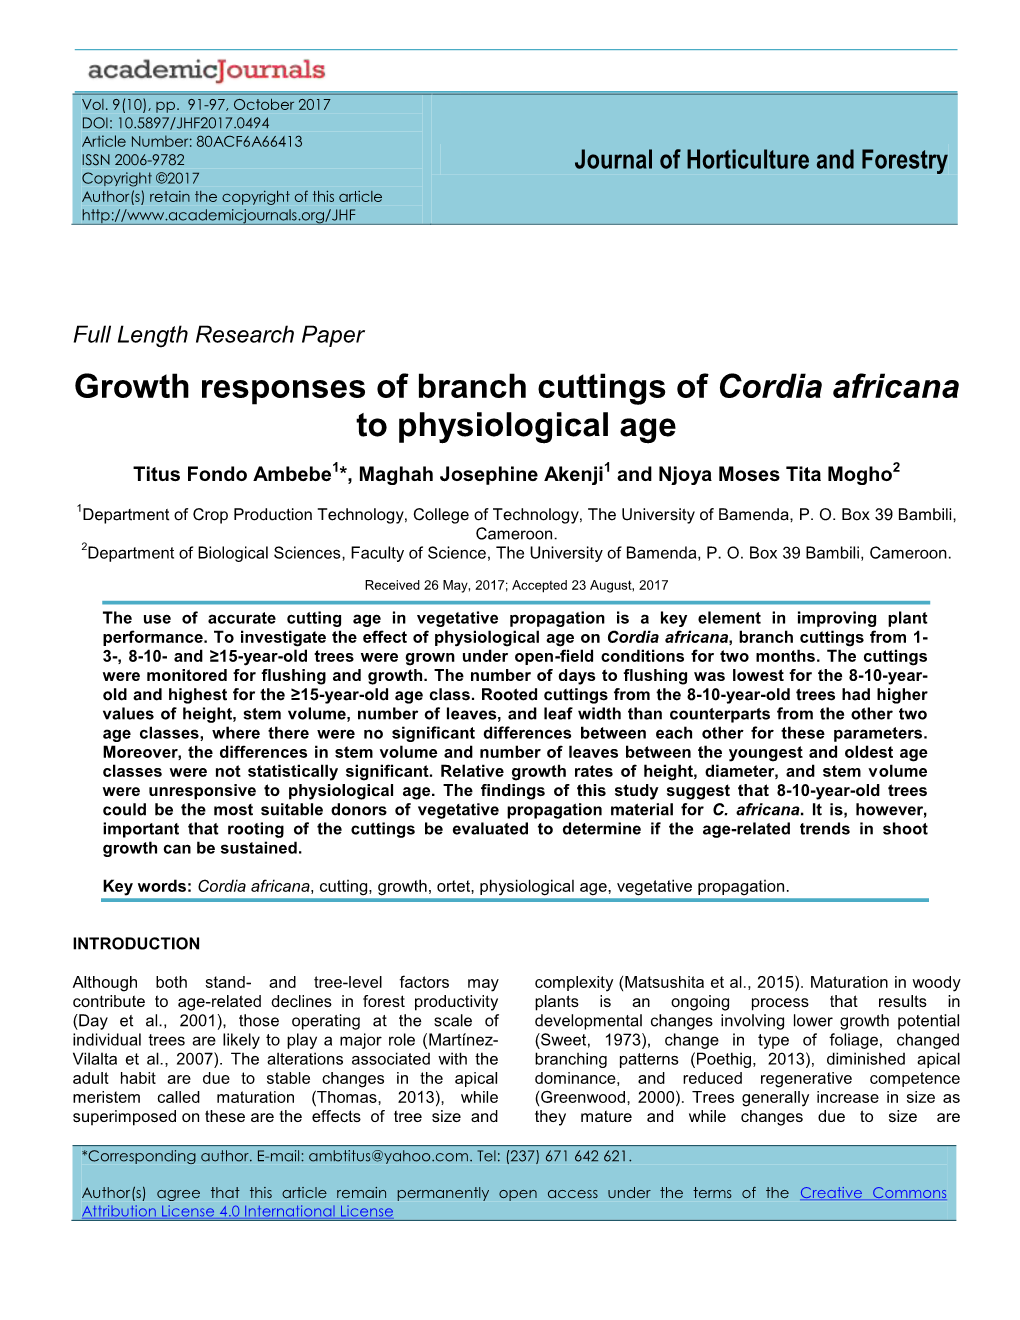 Growth Responses of Branch Cuttings of Cordia Africana to Physiological Age